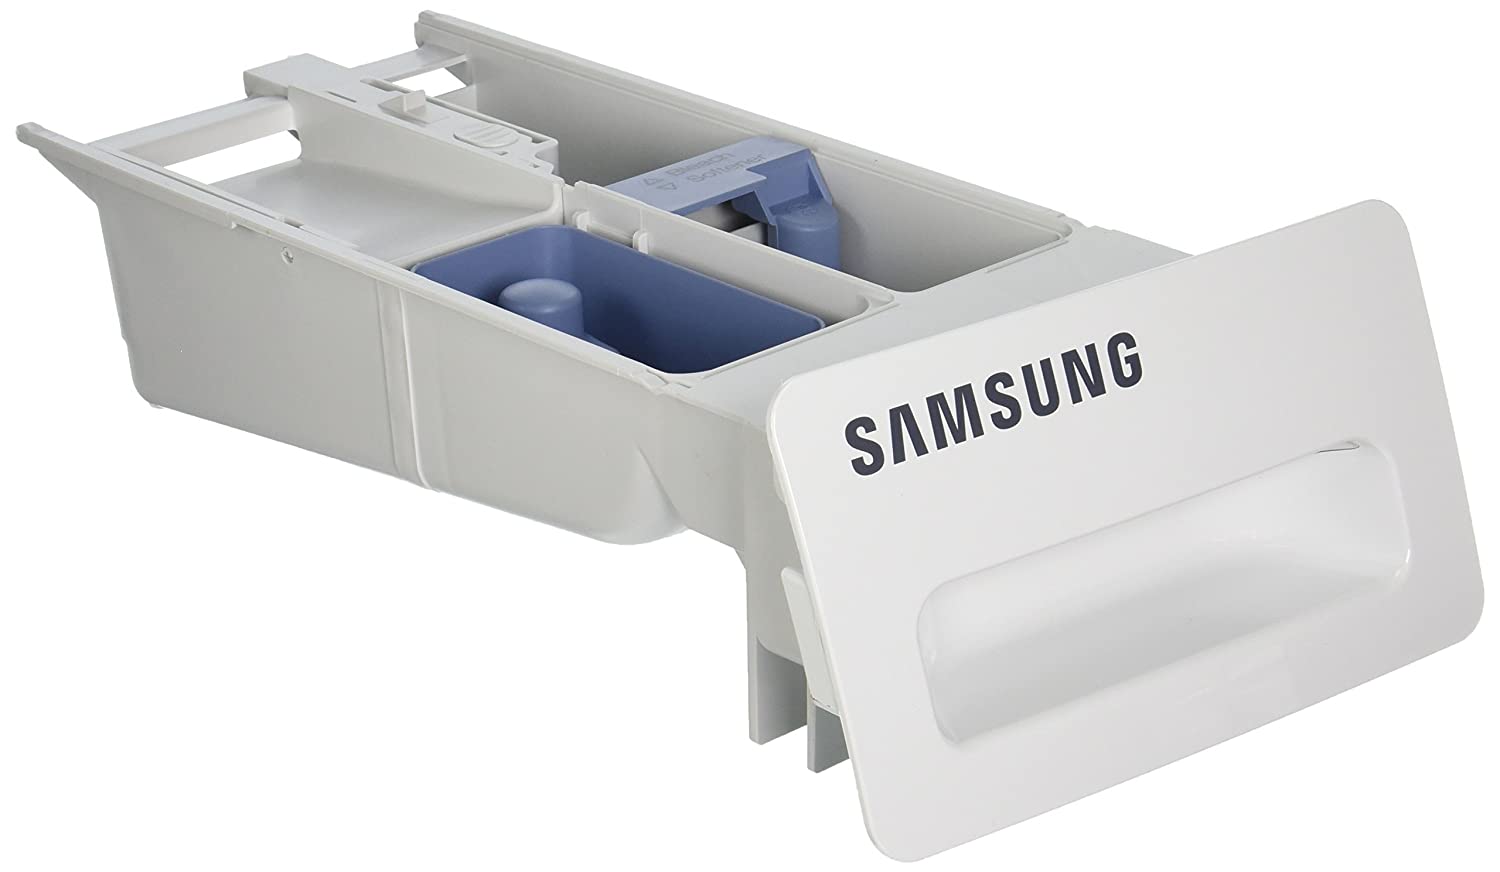 DC9715884A Samsung Washer Dispenser Drawer Assembly Appliance Parts